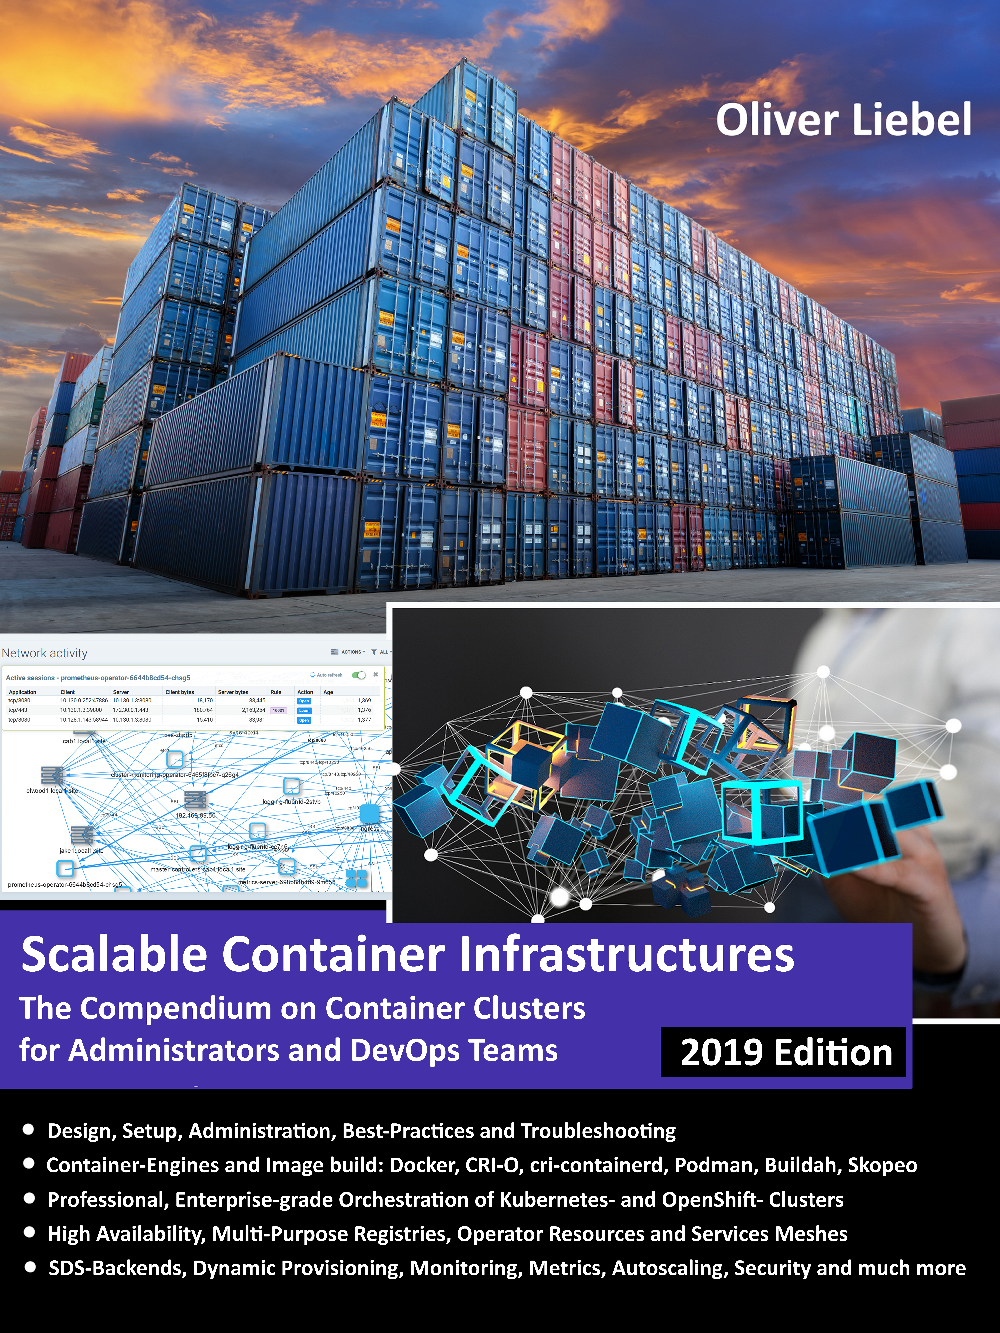 Scalable Container Infrastructures Edition 2019